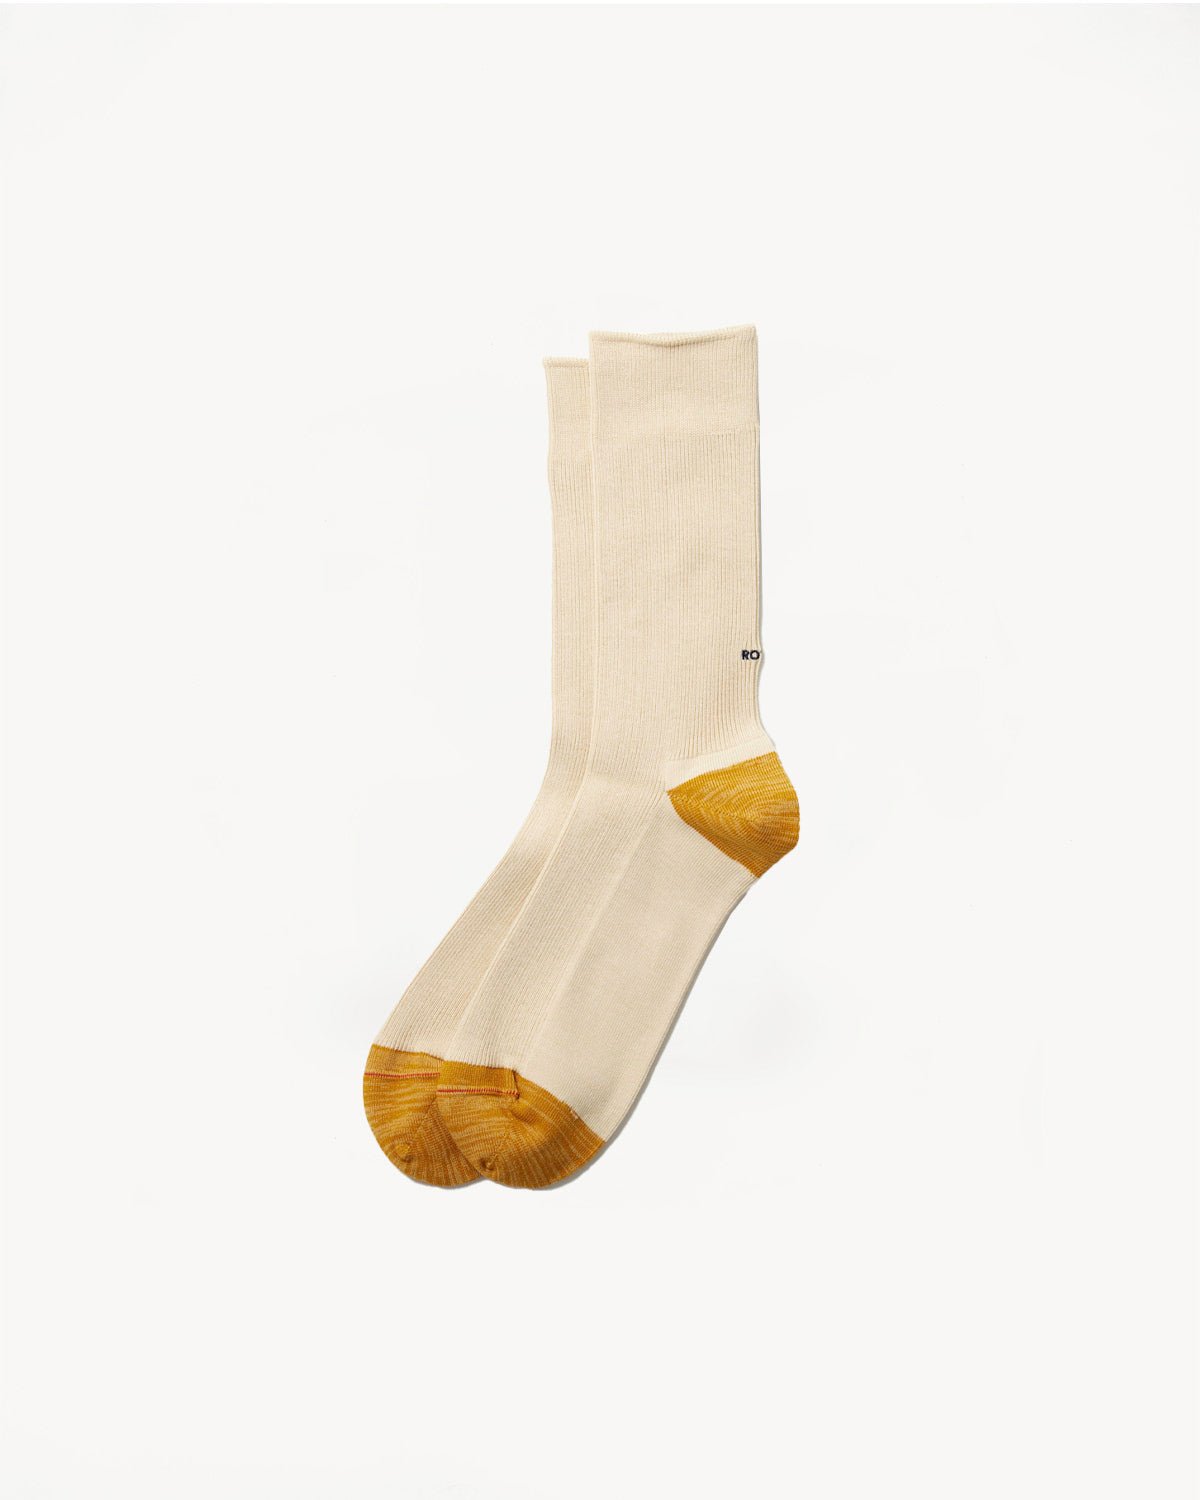 R1394 - Organic Cotton and Recycled Polyester Ribbed Crew Socks - Raw White, Gold